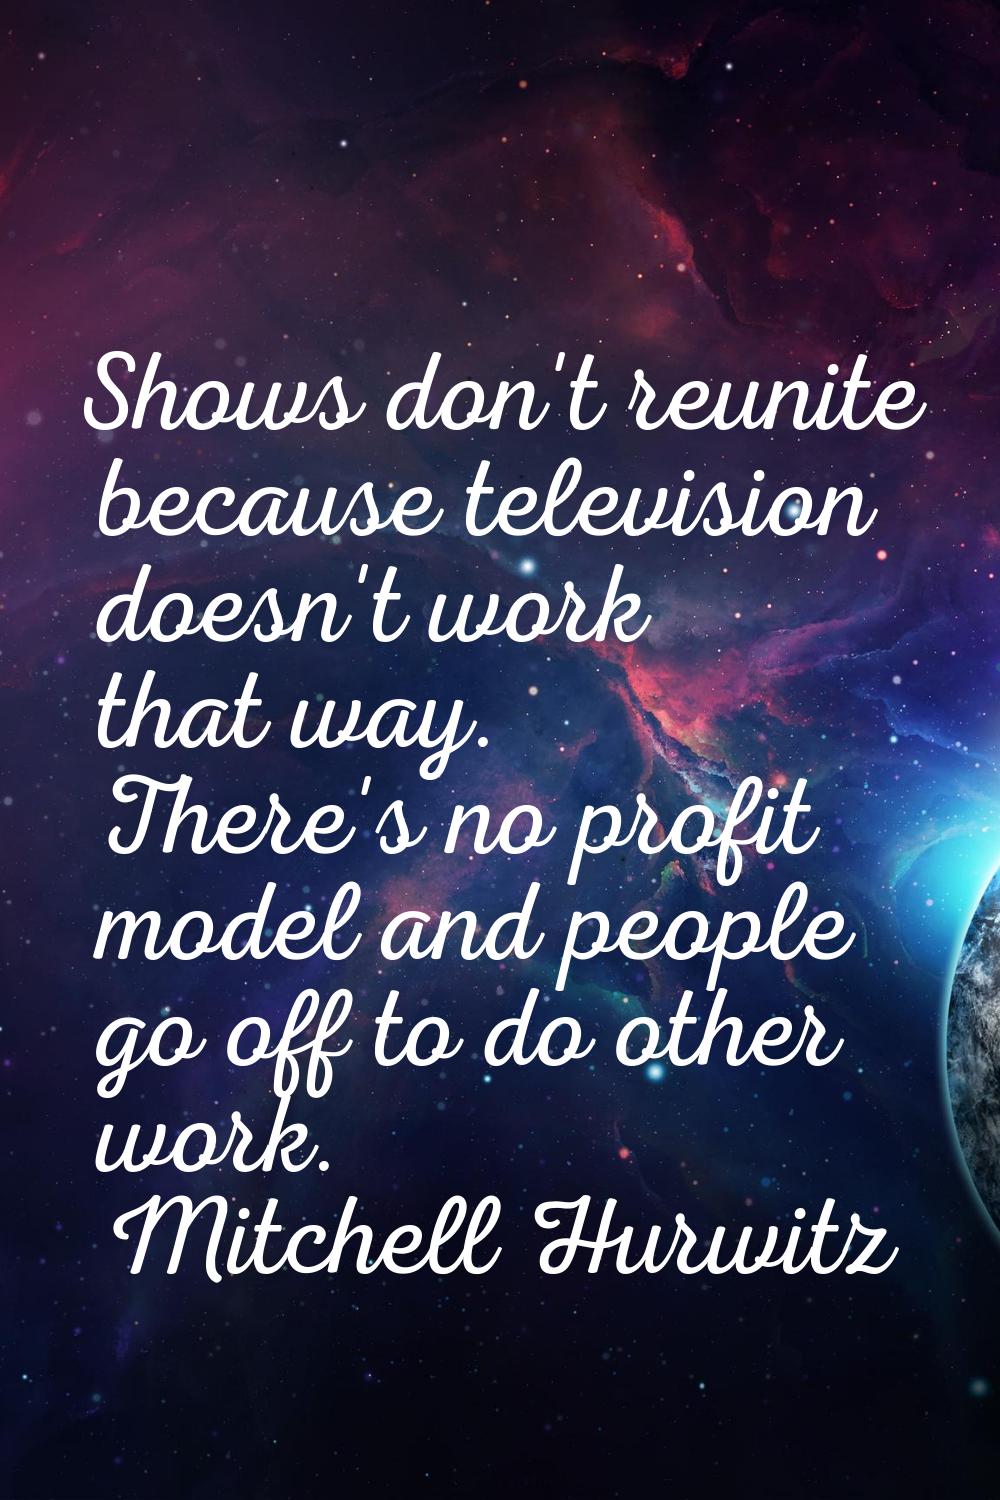 Shows don't reunite because television doesn't work that way. There's no profit model and people go